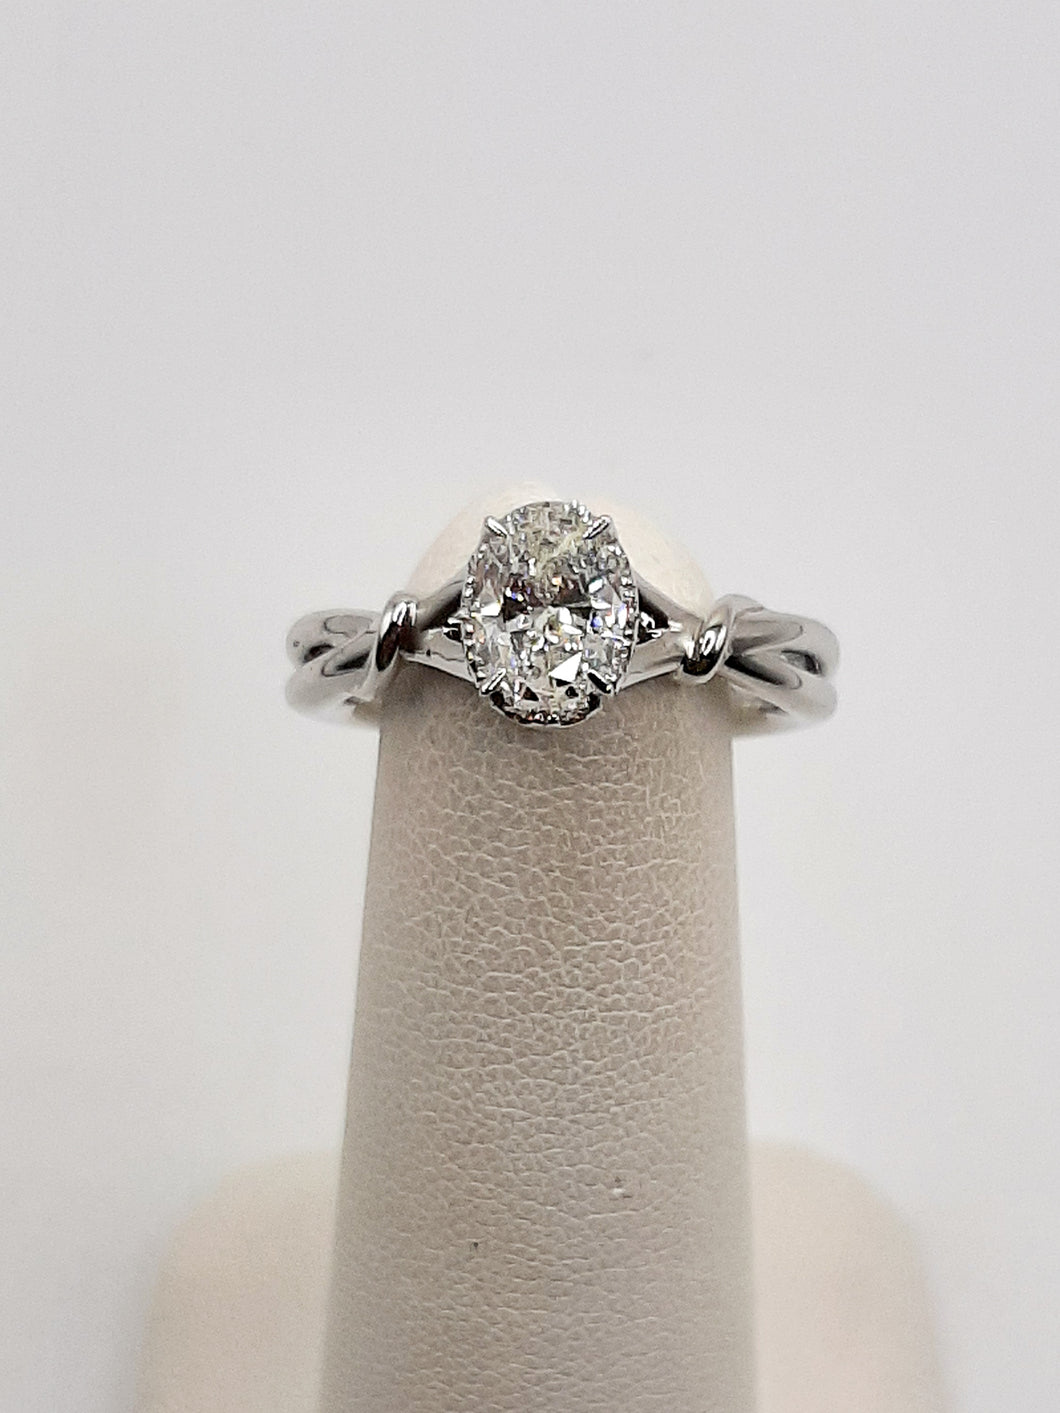 14Kt White Gold Solitaire Ring Featuring a .83 Carat Oval Diamond